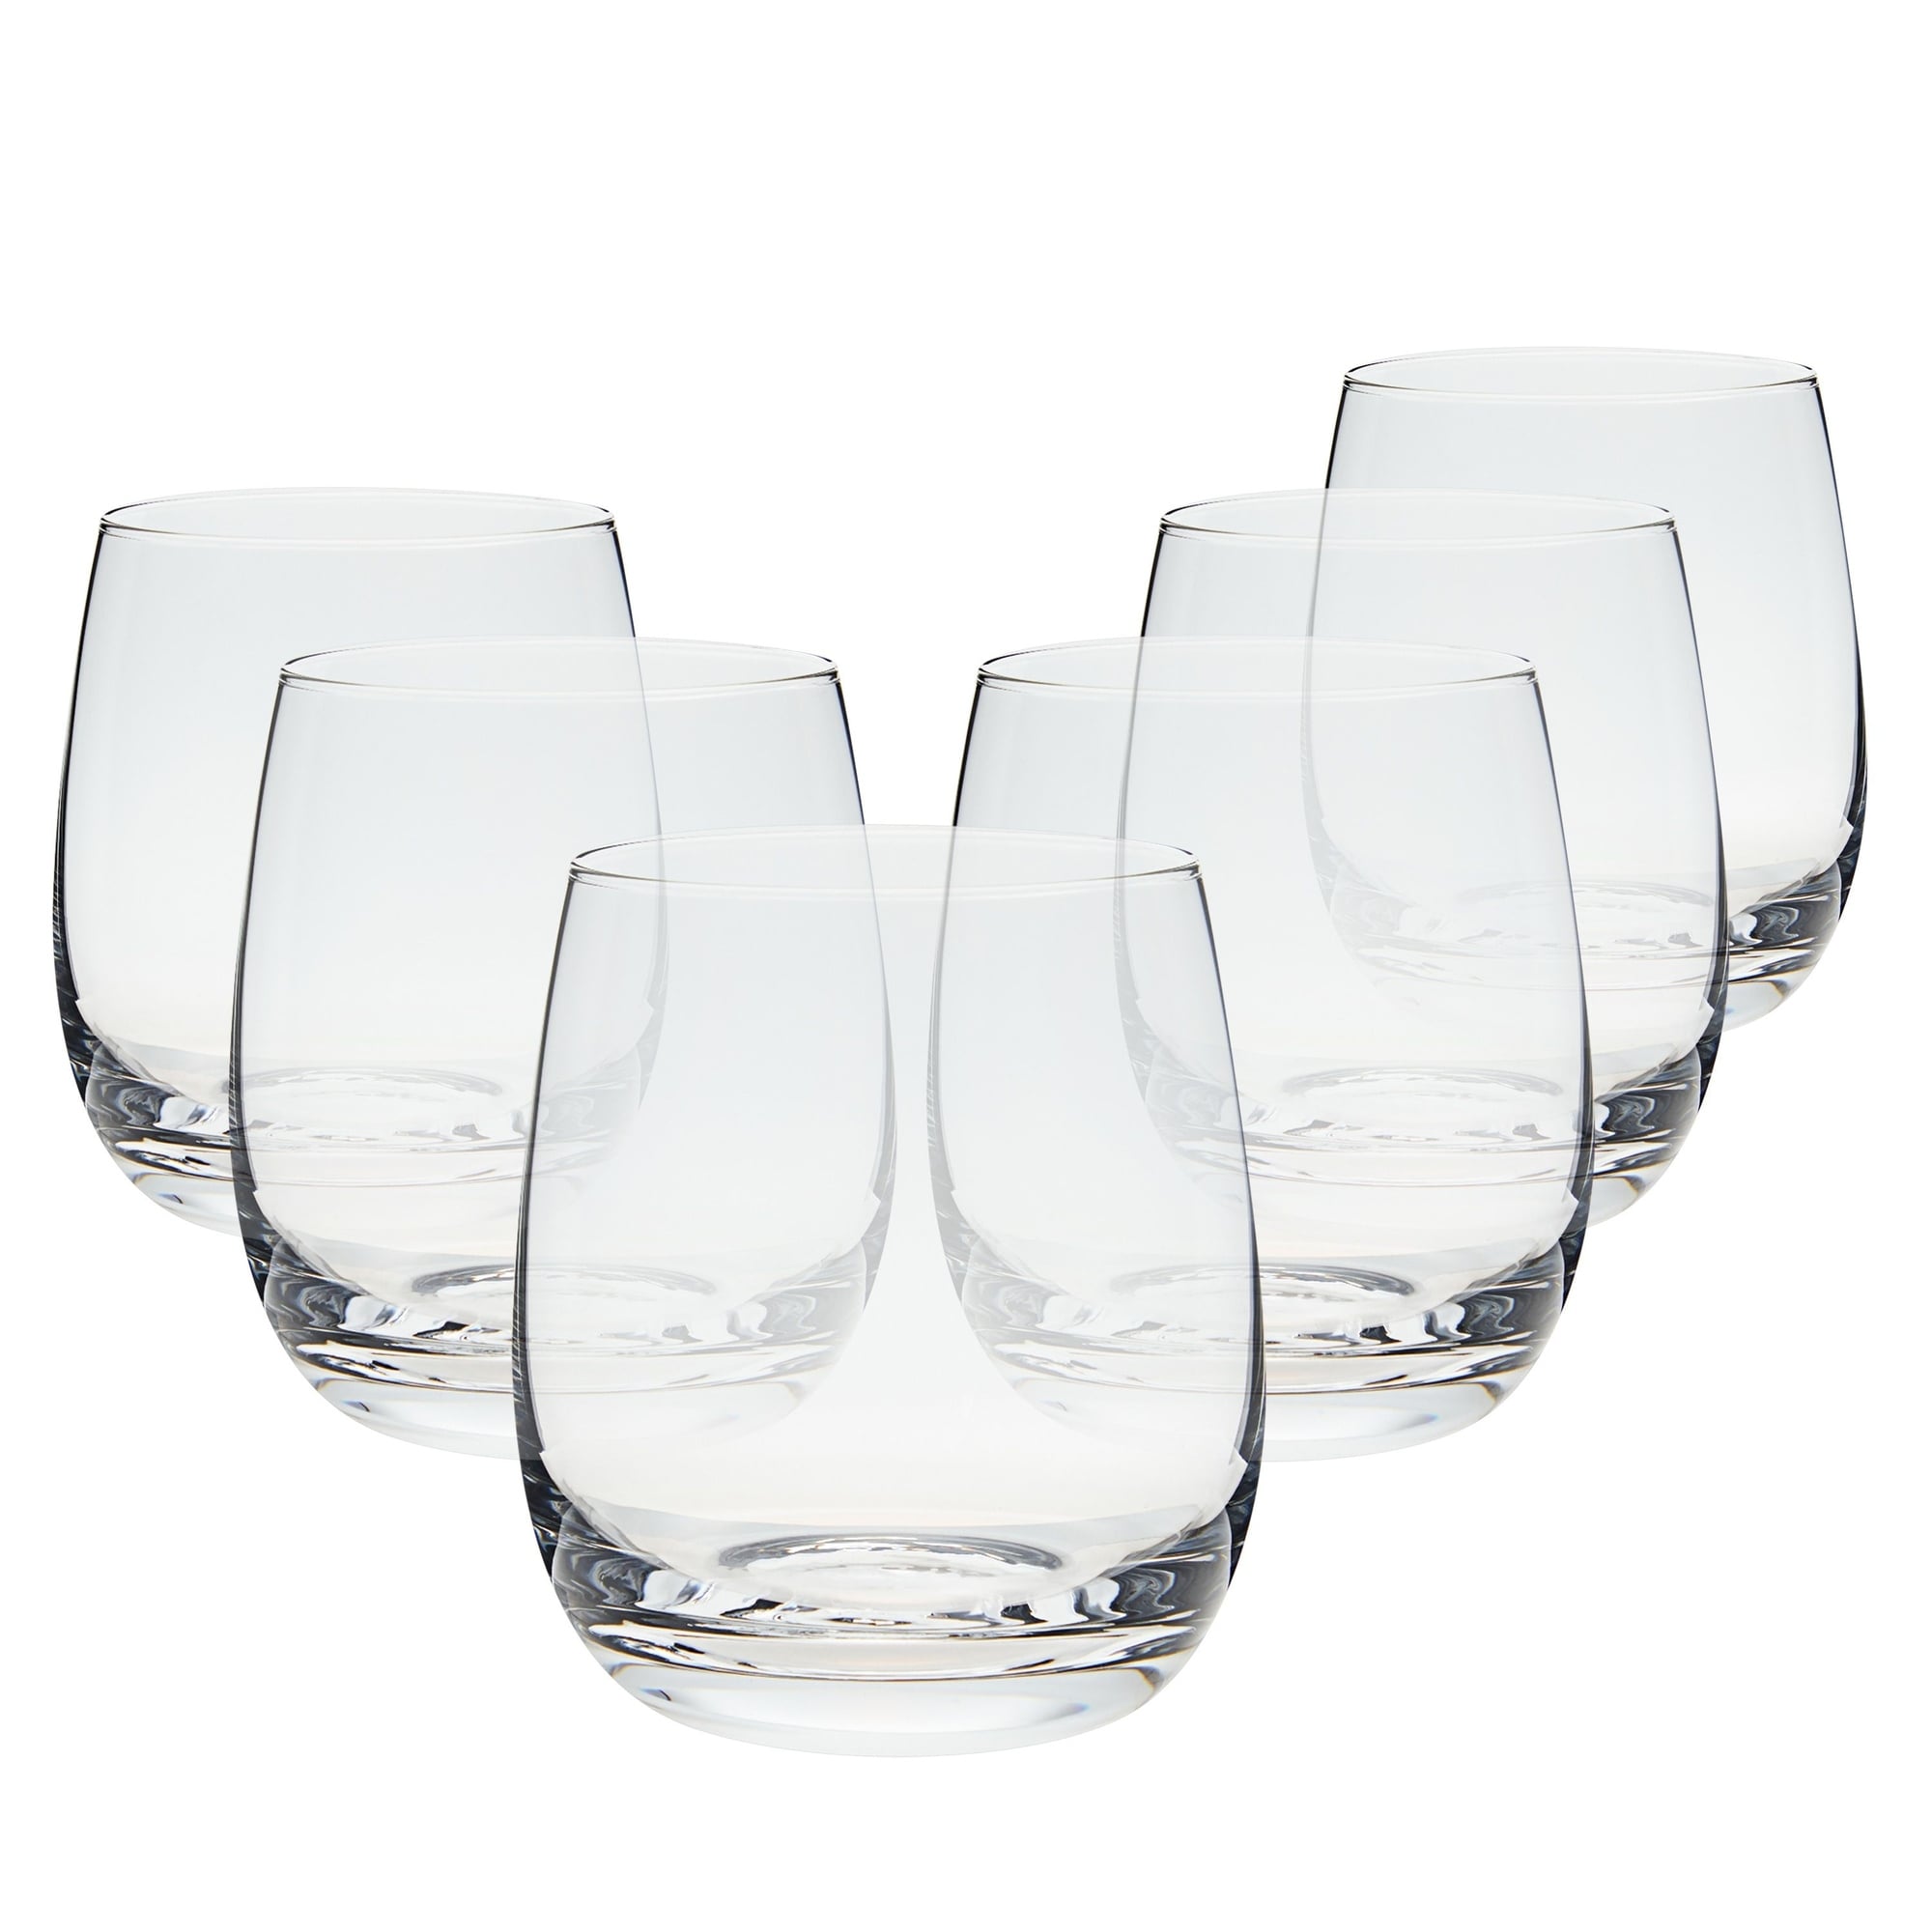 https://ak1.ostkcdn.com/images/products/is/images/direct/8faa105ef387a3a8a54987d981e1c9788ea475ac/12oz-Whiskey-Glasses%2C-Double-Old-Fashioned-Glasses-for-Scotch%2C-Bourbon%2C-Cocktails-%28Set-of-6%29.jpg